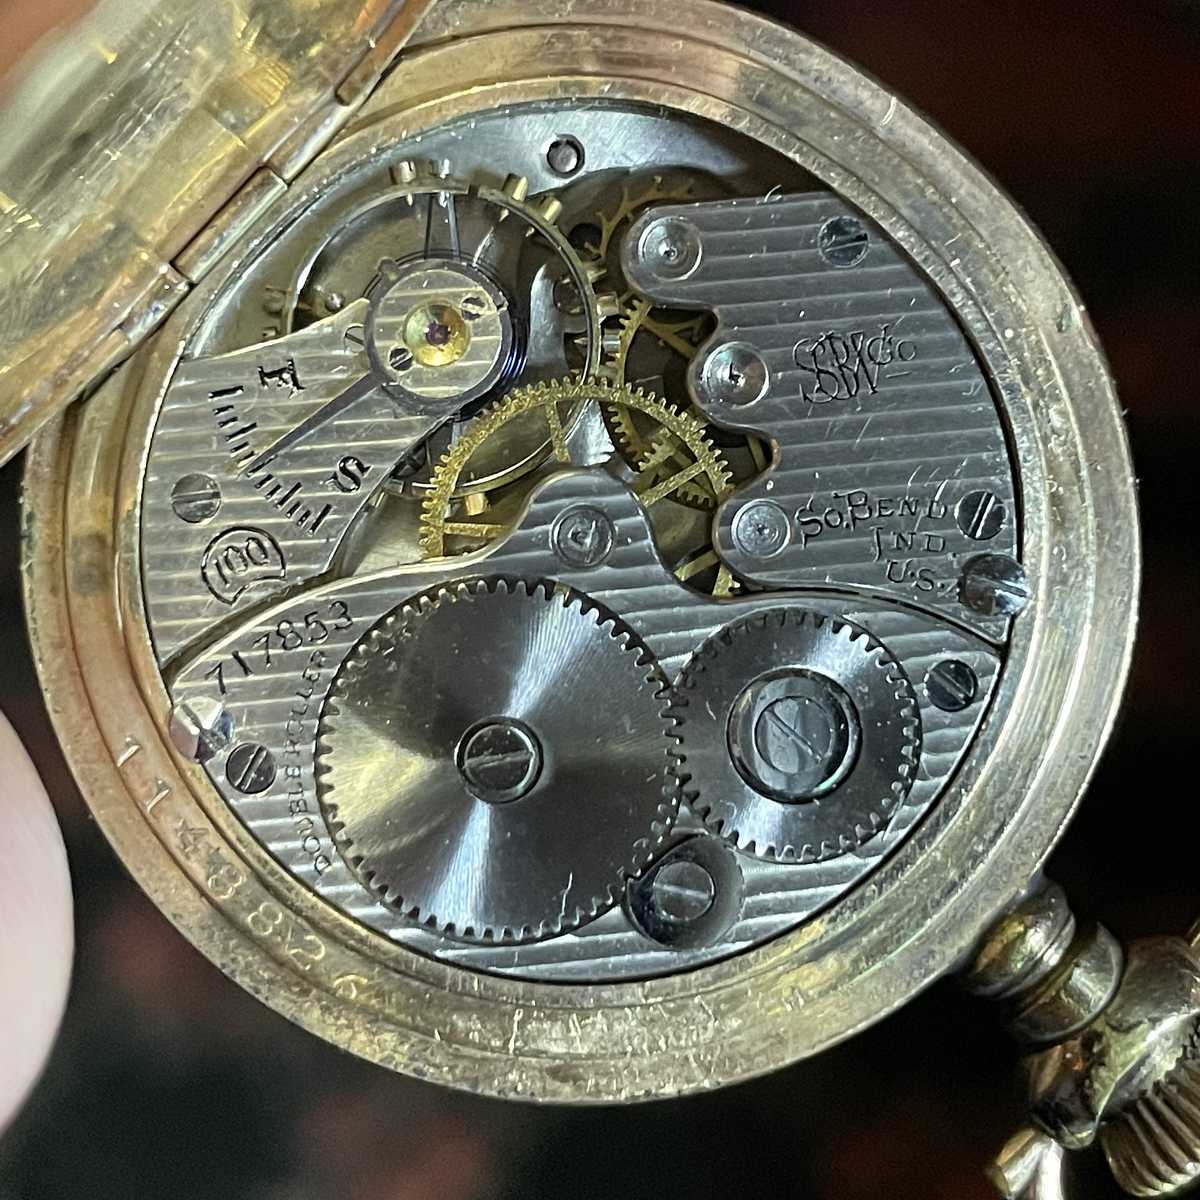 1912 South Bend Watch Grade 100 Movement in pocket watch case